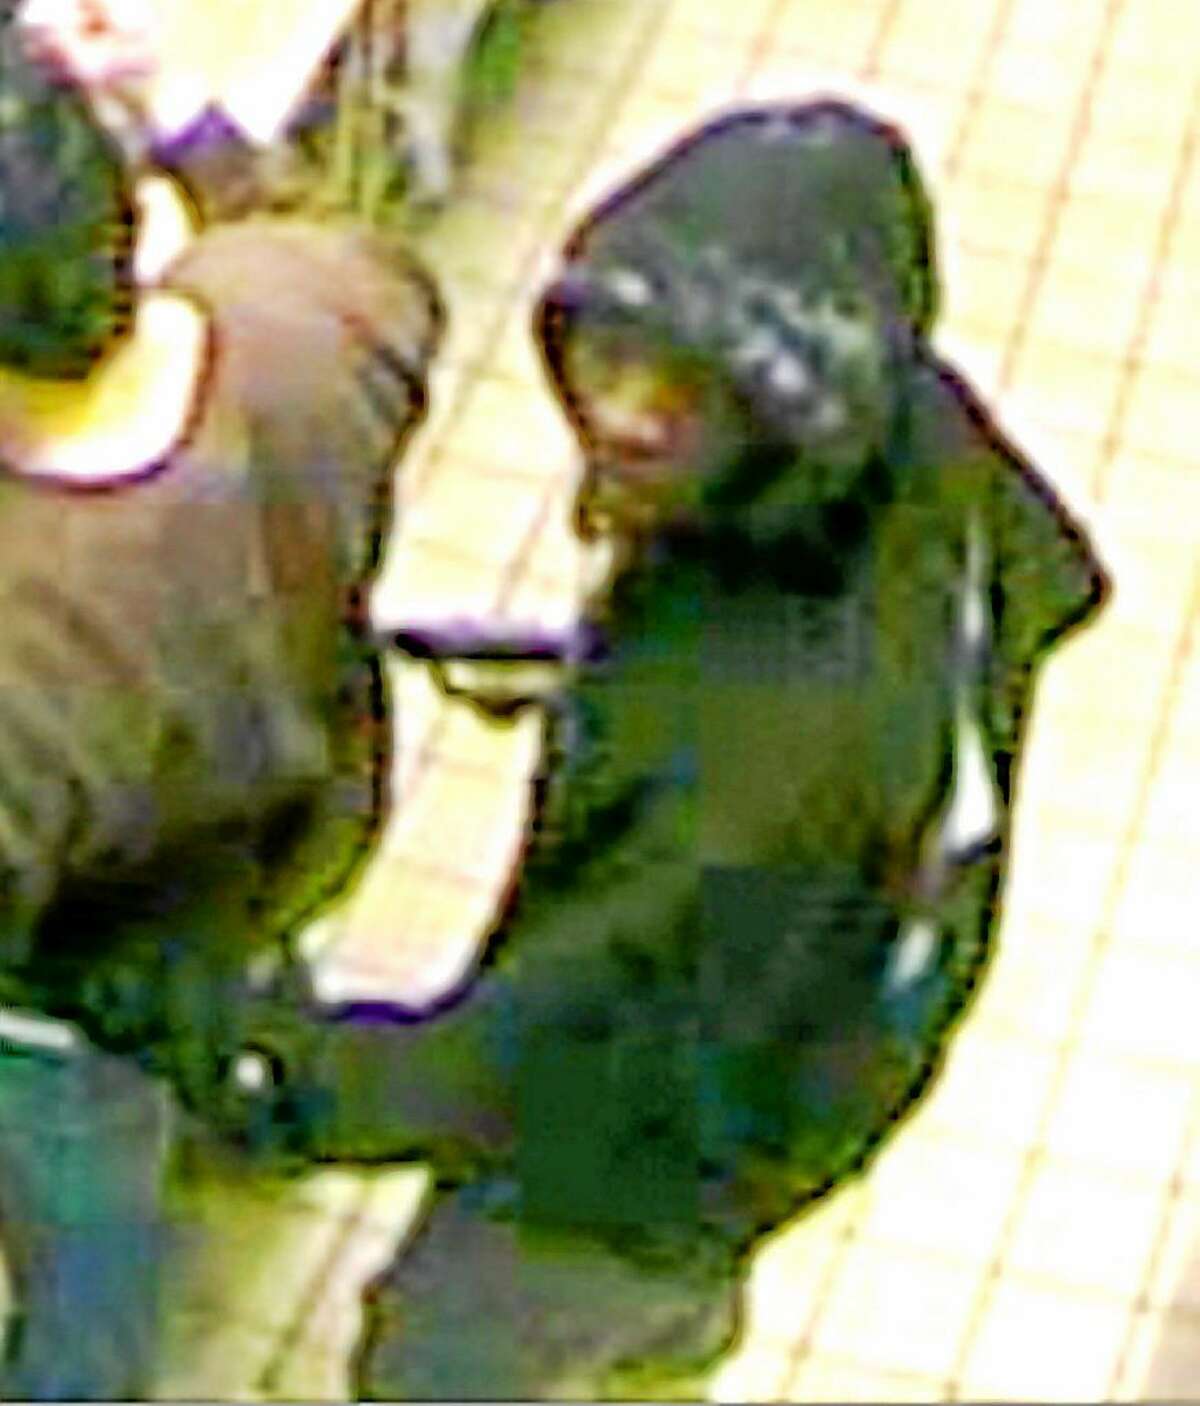 West Haven police are looking for two males who robbed a Dunkin’ Donuts on Derby Avenue on Monday. One of the suspects wore a hooded sweatshirt and brandished a weapon, and the other wore a mask, police said.